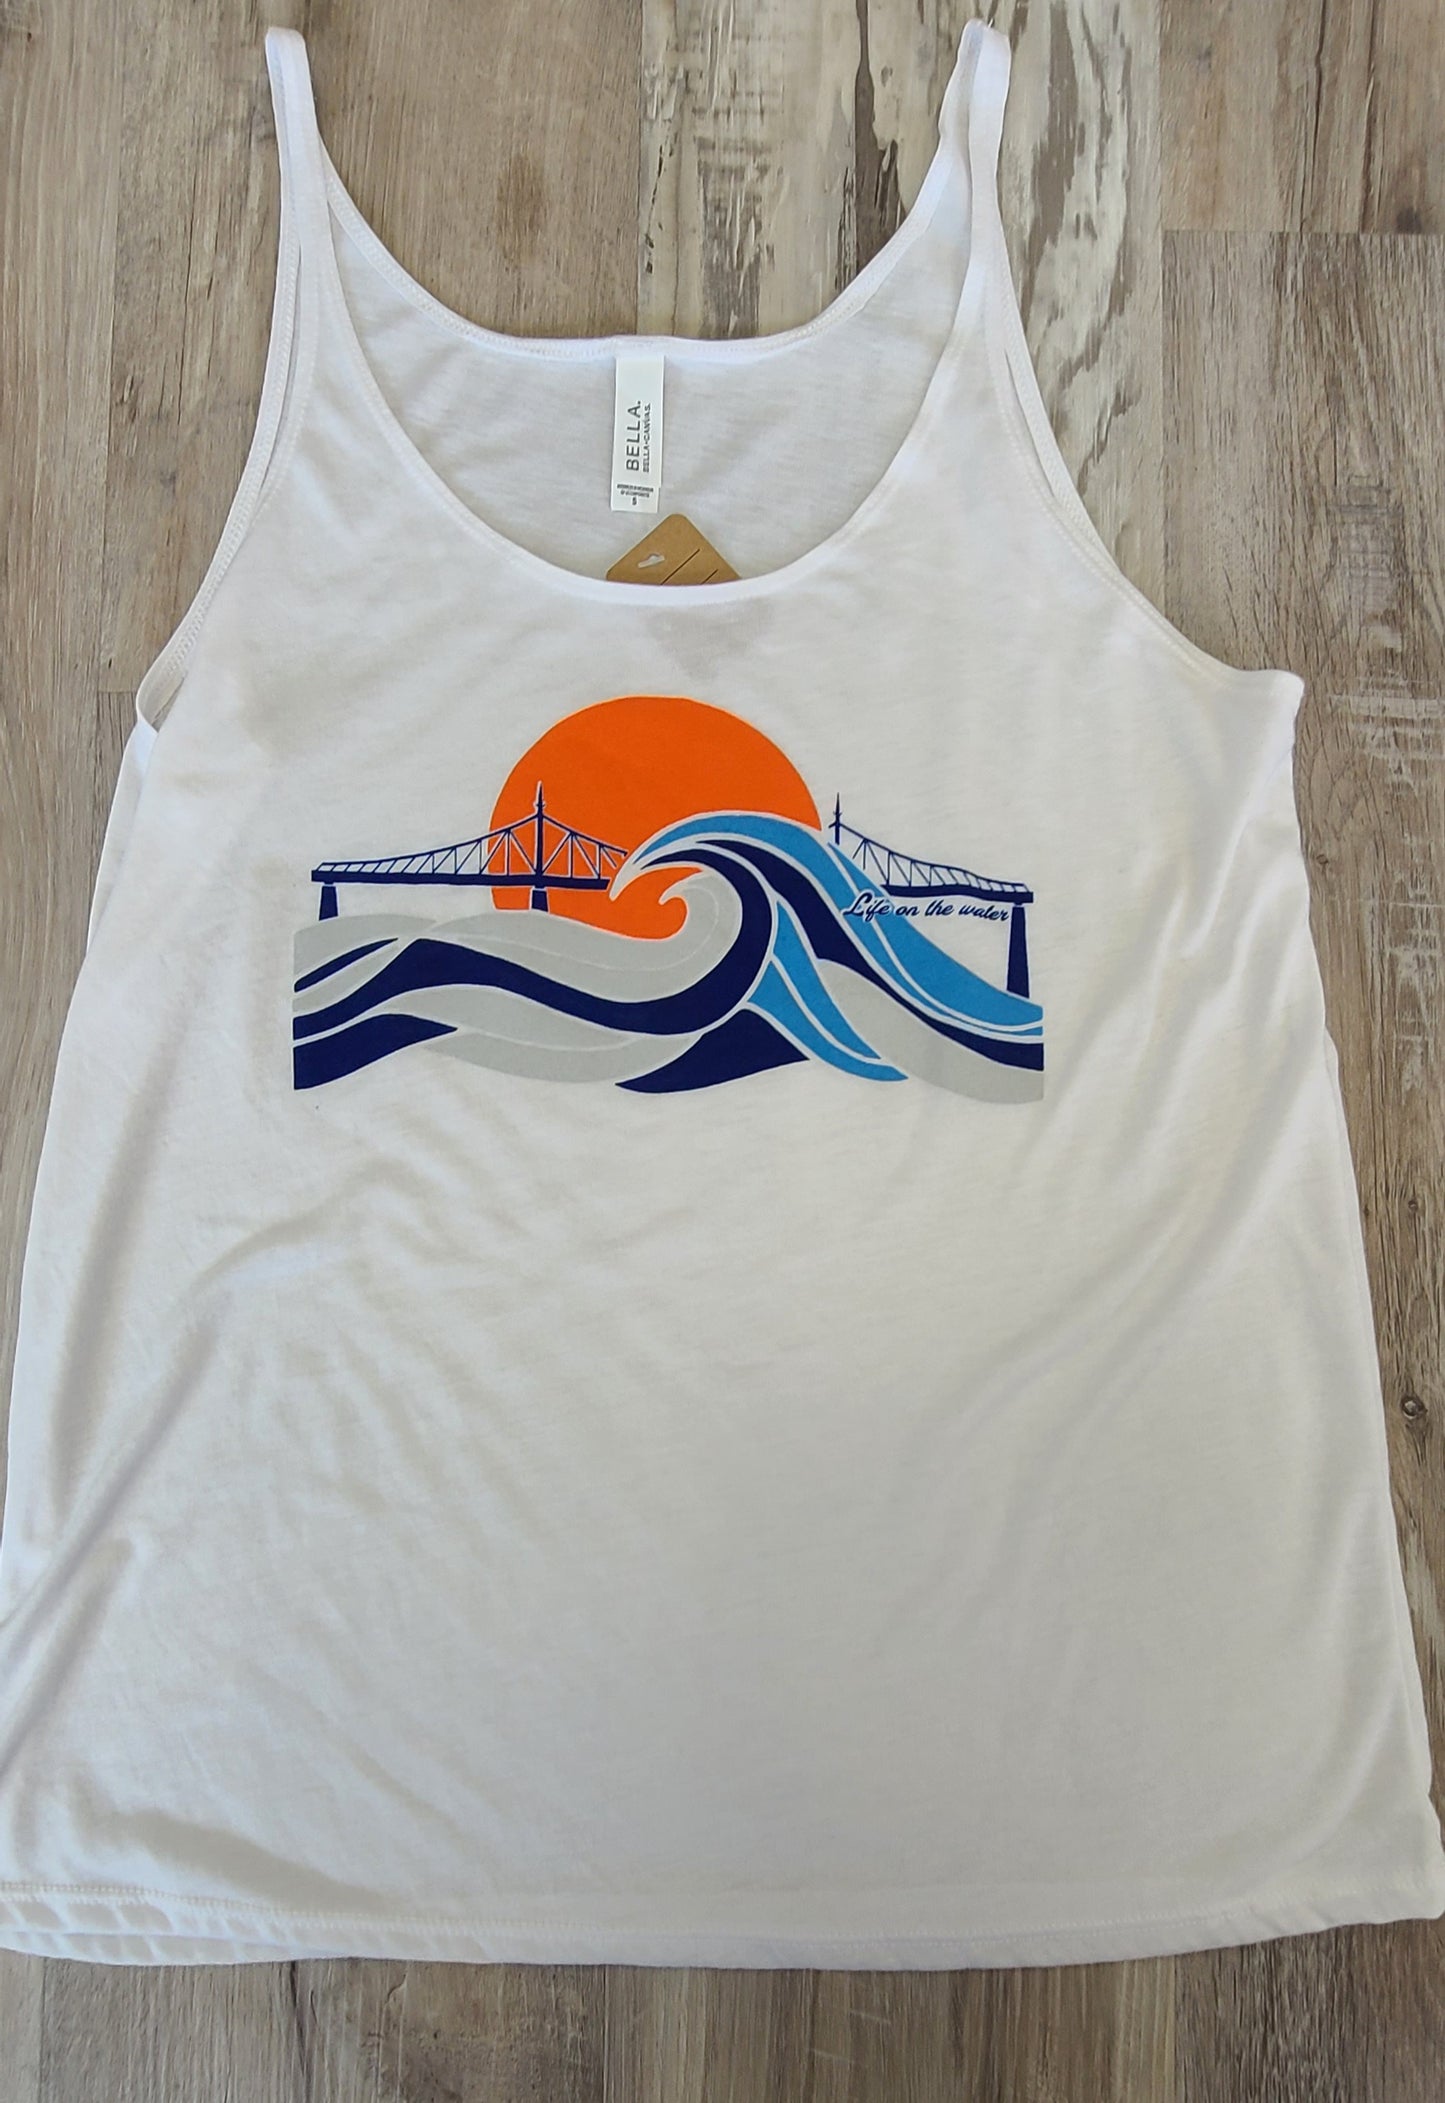 Life On The Water 2021 Design - Tank Top